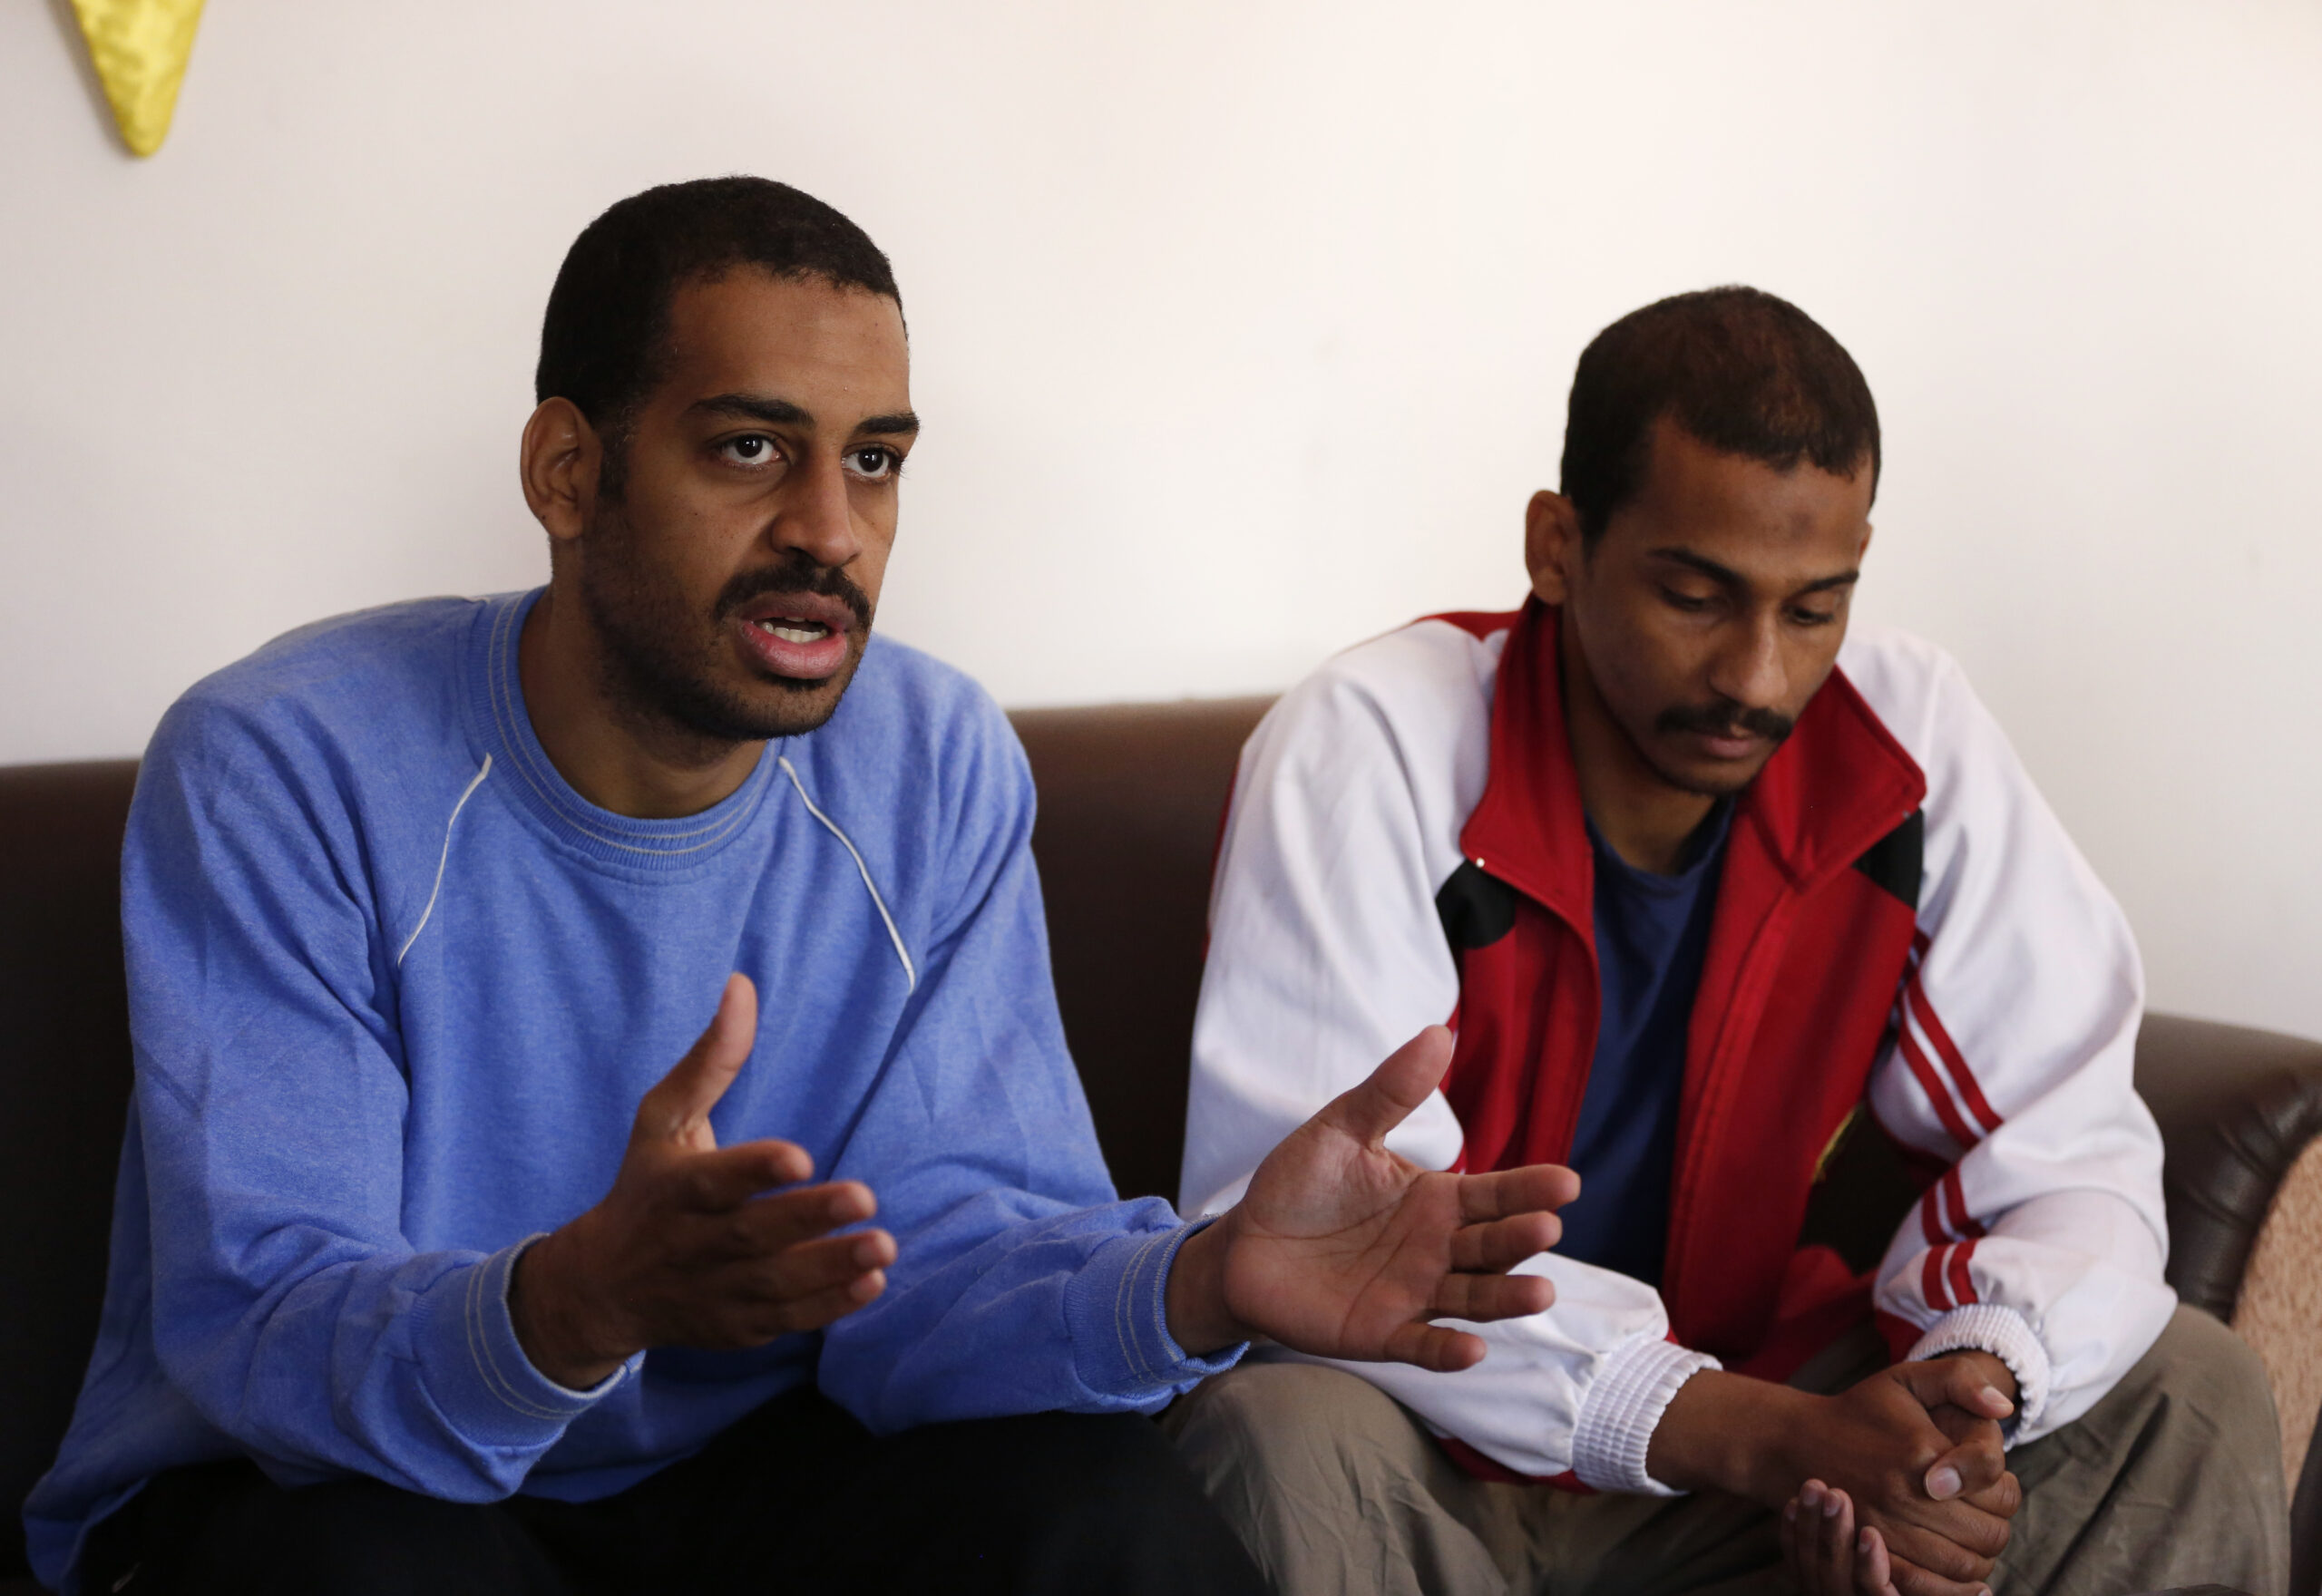 FILE - In this March 30, 2019, file photo, Alexanda Amon Kotey, left, and El Shafee Elsheikh, who were allegedly among four British jihadis who made up a brutal Islamic State cell dubbed "The Beatles," speak during an interview with The Associated Press at a security center in Kobani, Syria. The Justice Department is preparing to announce charges Wednesday against two men from Britain who joined the Islamic State and were part of a cell that beheaded Western hostages, a law enforcement official said. Their arrival in the U.S. to face charges sets the stage for arguably the most sensational terrorism prosecution since the 2014 case against the suspected ringleader of a deadly attack on the diplomatic compound in Benghazi, Libya.(AP Photo/Hussein Malla, File)